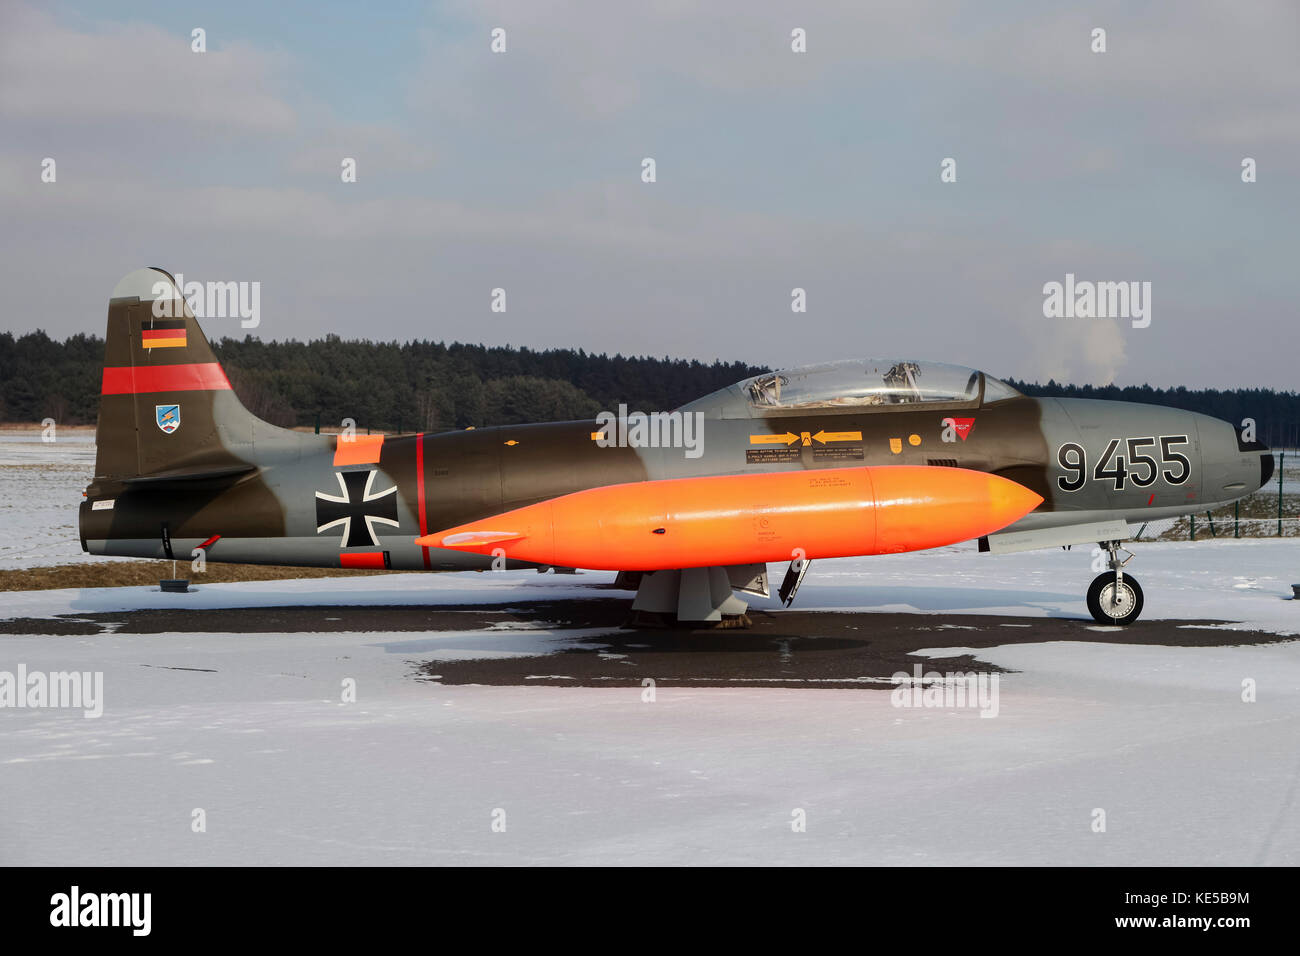 German air force t-33 shooting star trainer avion. Banque D'Images